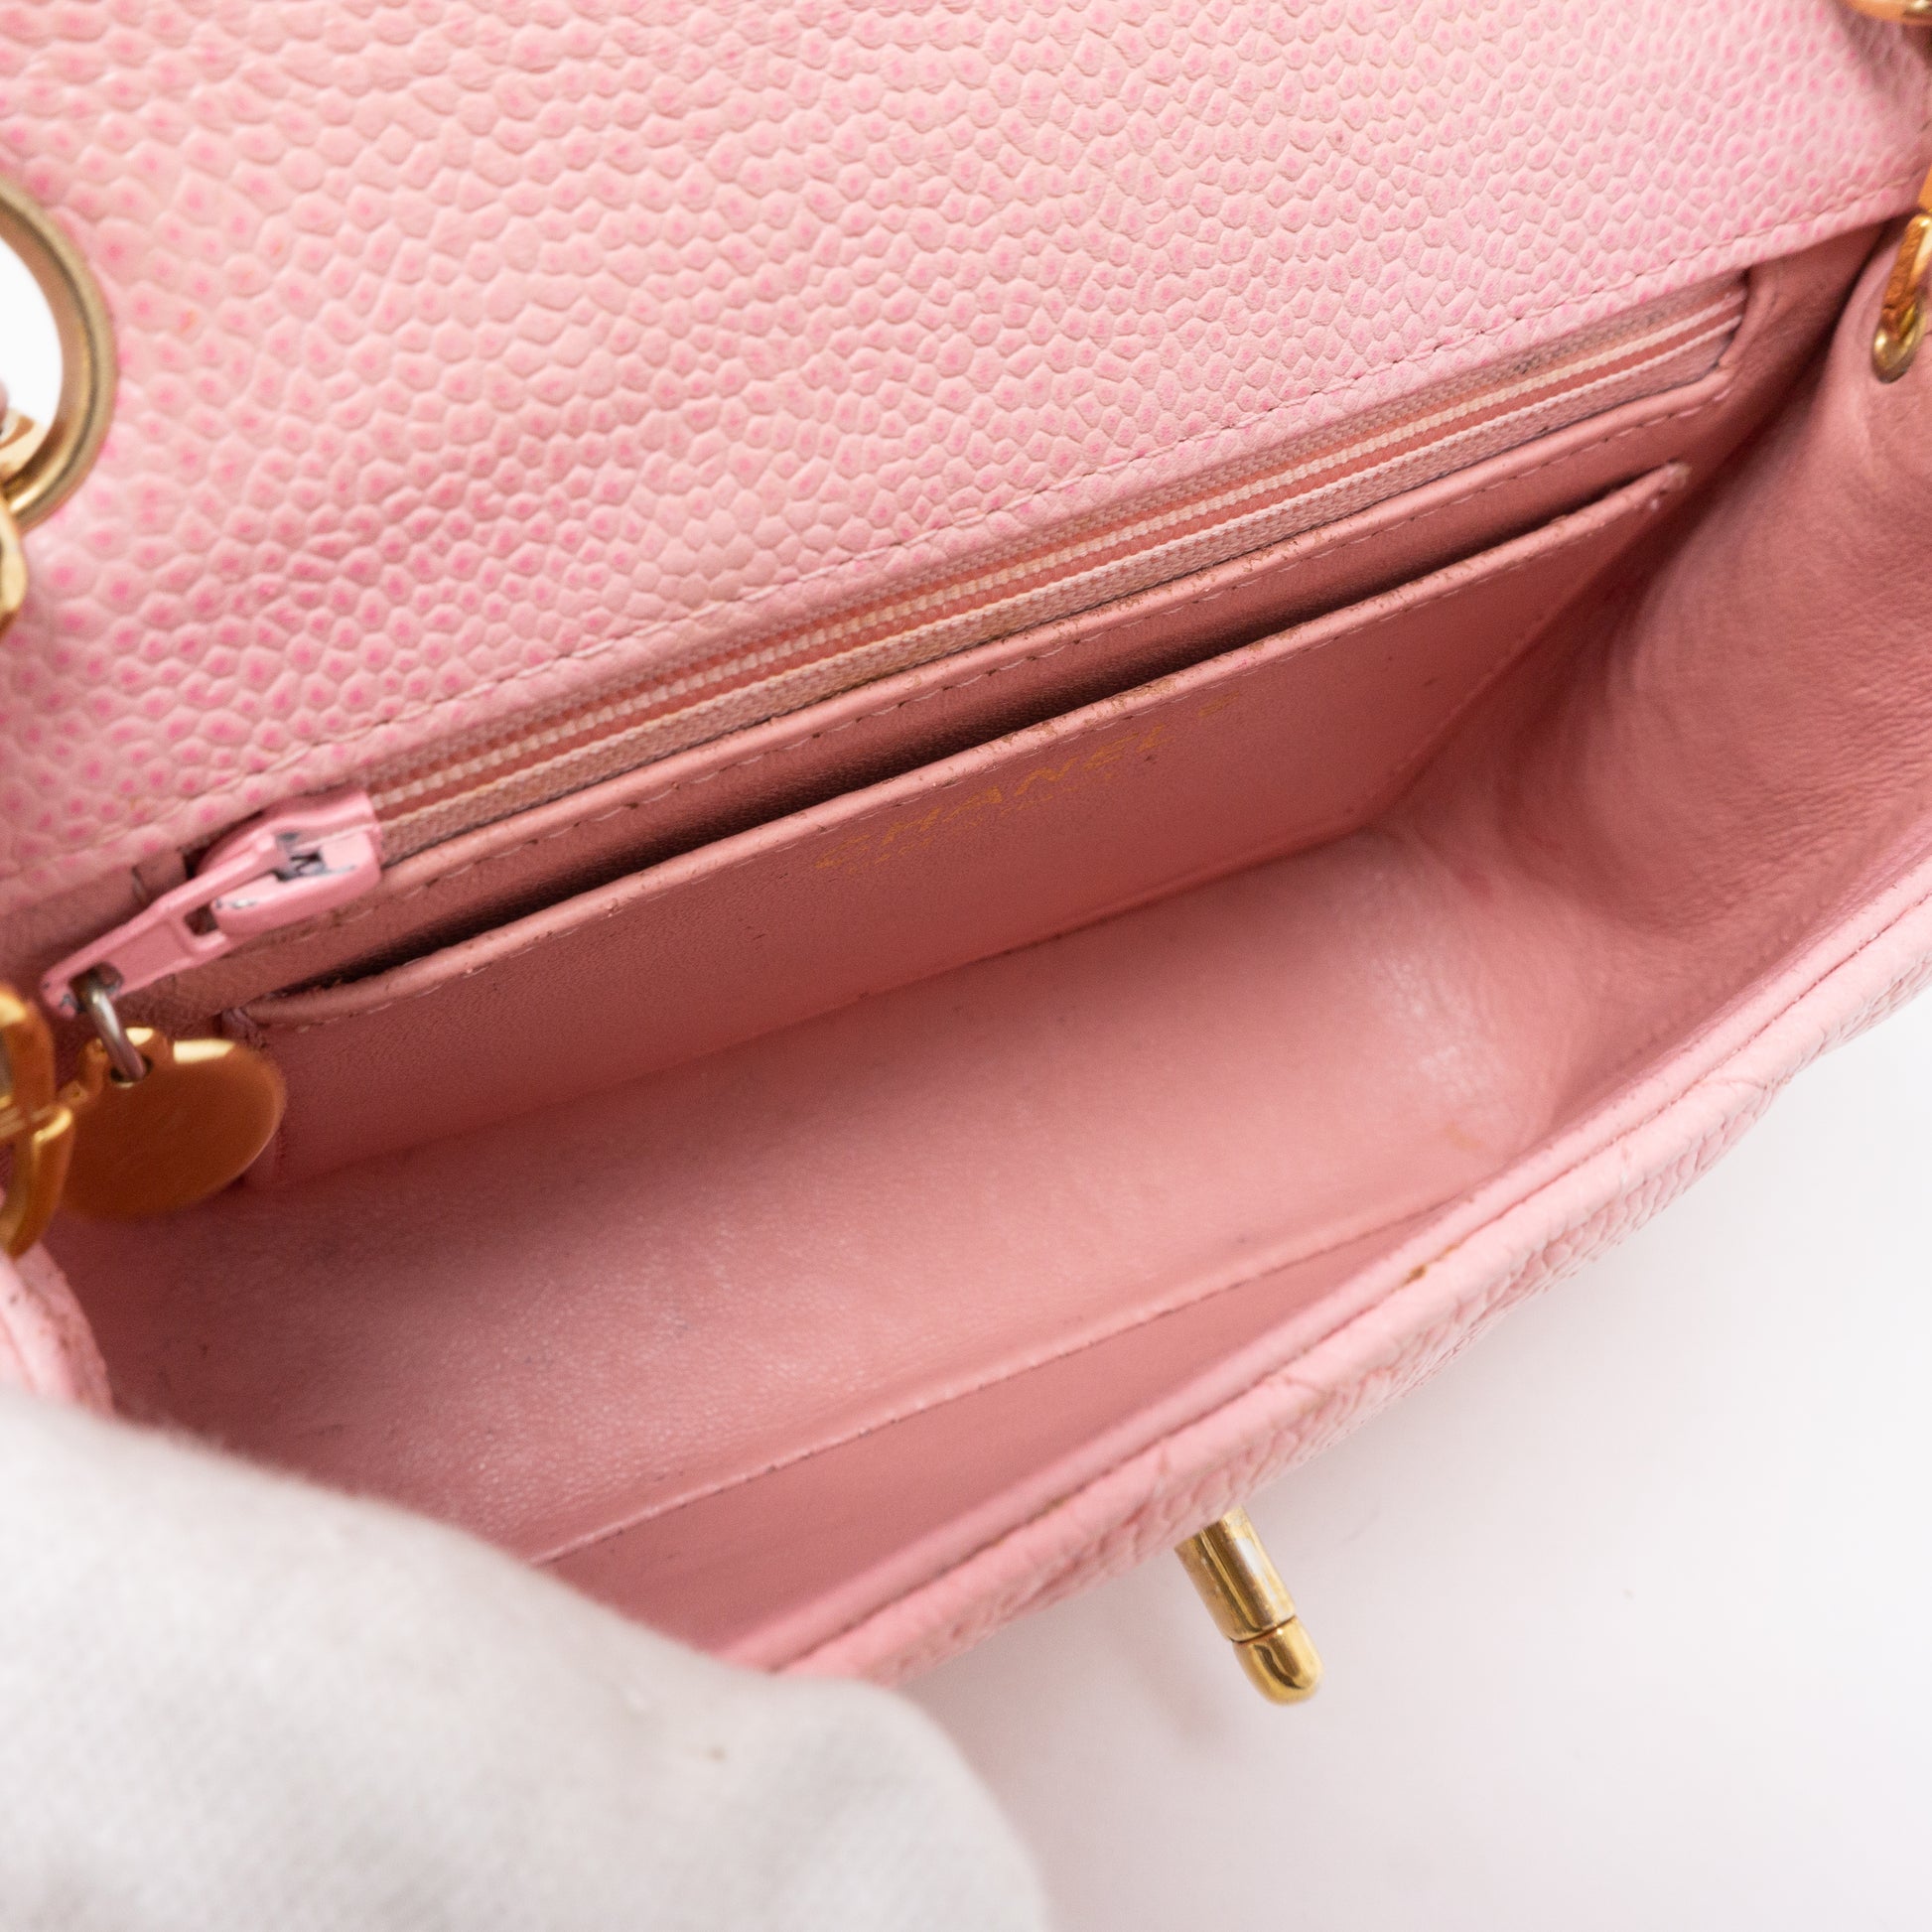 Bonhams : CHANEL SOFT PINK LAMBSKIN SMALL CLASSIC DOUBLE FLAP BAG WITH  SILVER TONE HARDWARE (includes felt protector, dust bag and original box)